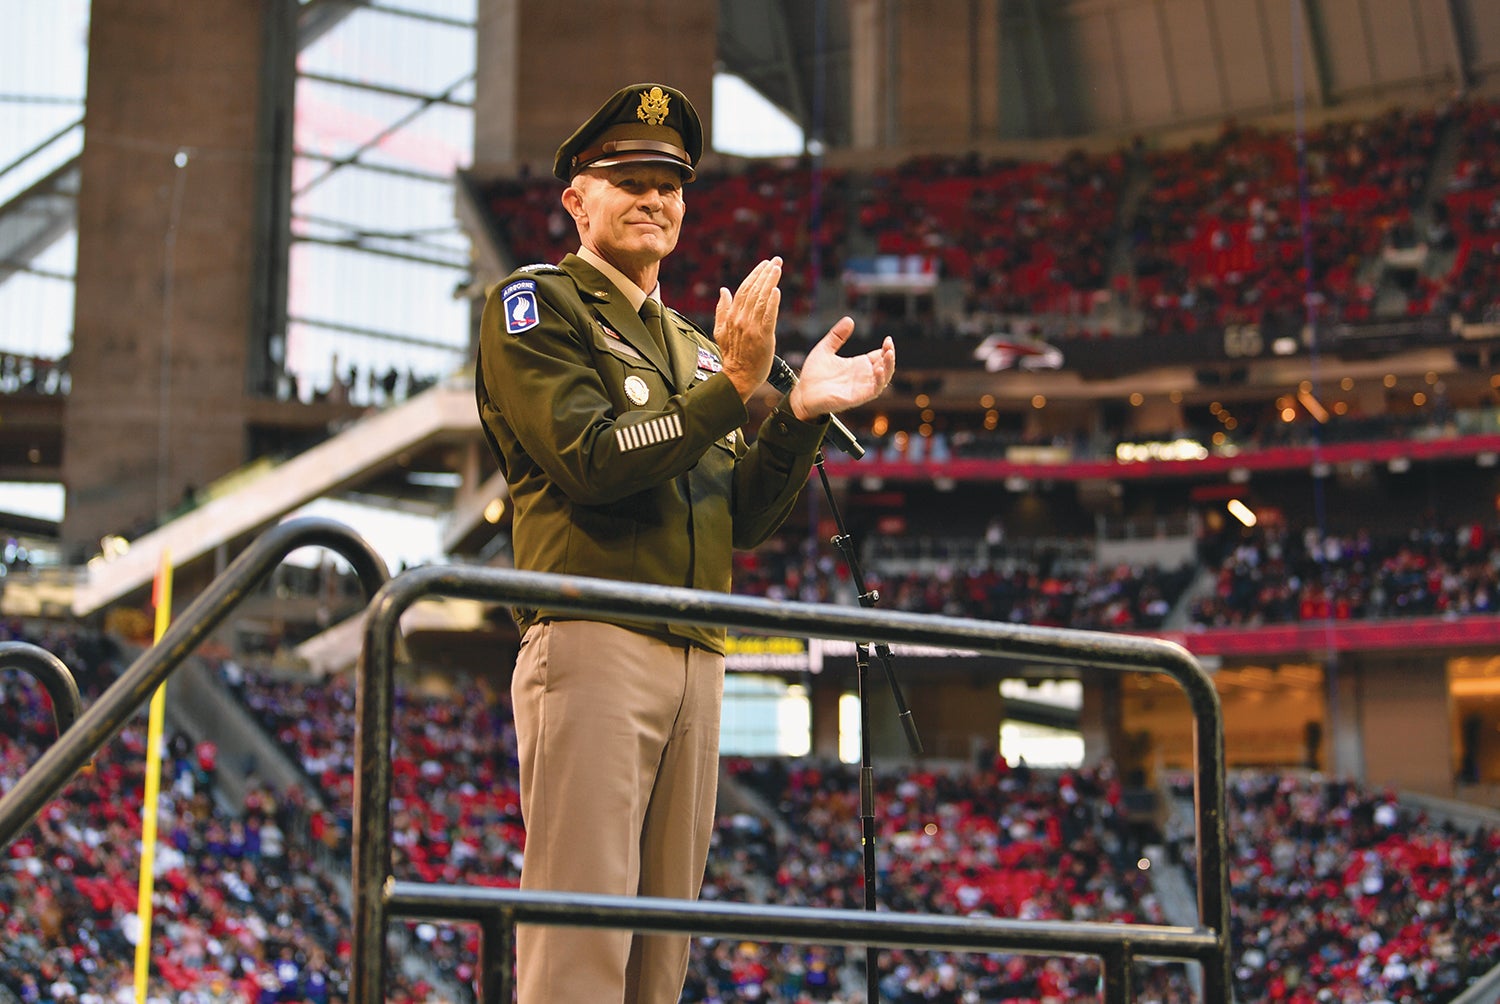 Army Chief of Staff Gen. Randy George administers the oath of enlistment to more than 600 new recruits and current service members during the NFL’s Call To Service event at Mercedes-Benz Stadium in Atlanta. (Credit: U.S. Army/Sgt. 1st Class Alexander Agrinsoni)